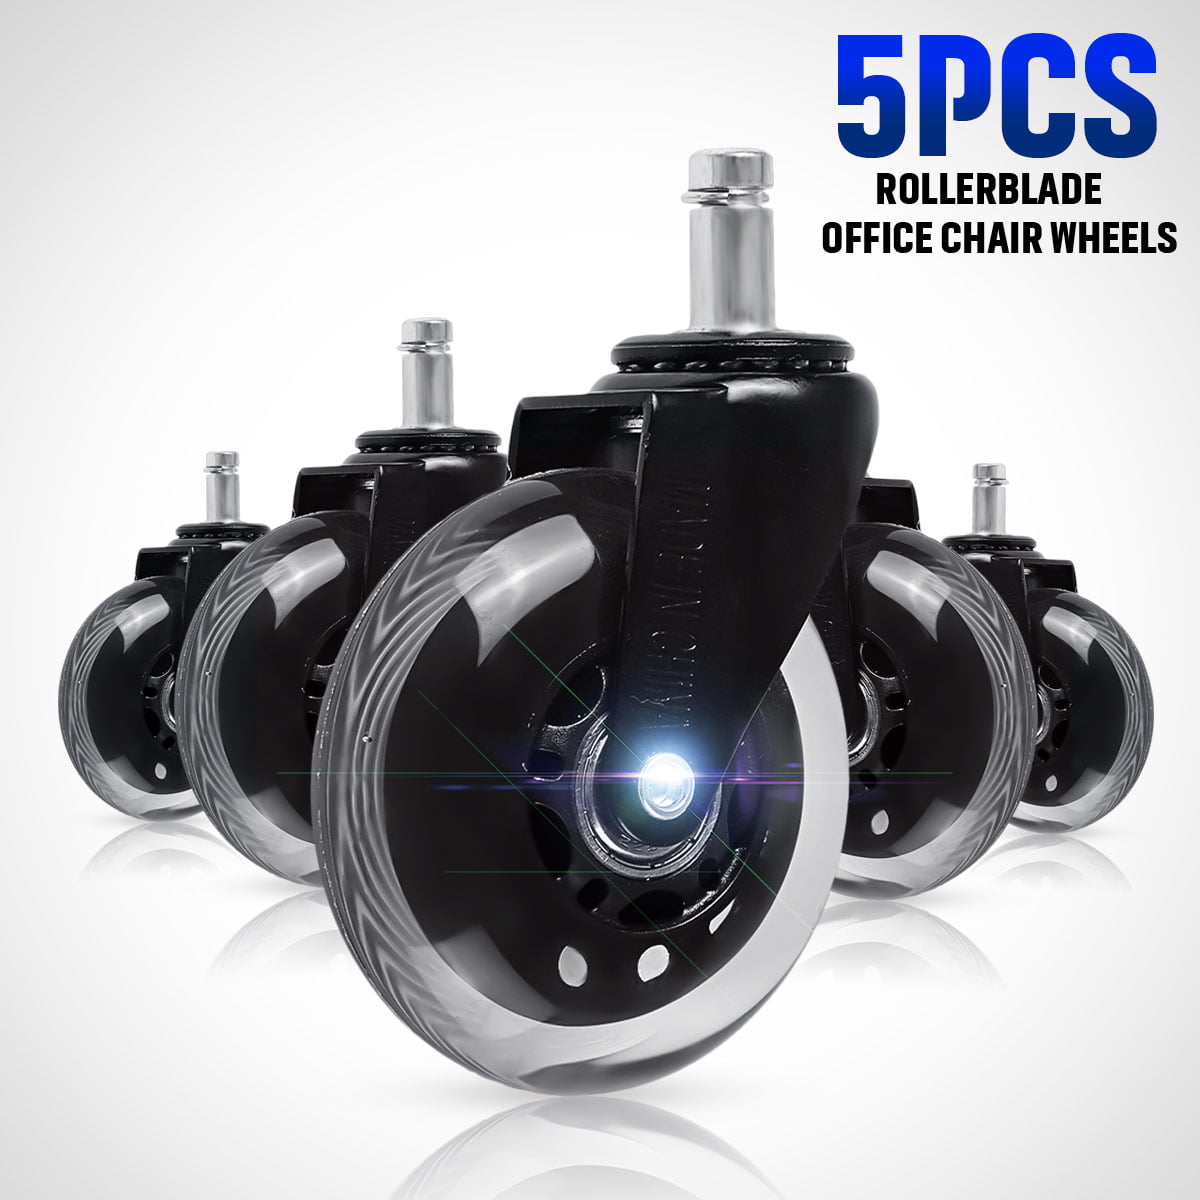 5 Pcs Replacement Swivel Office Chair Wheels Casters Universal Fit Set of 5 691028390688 